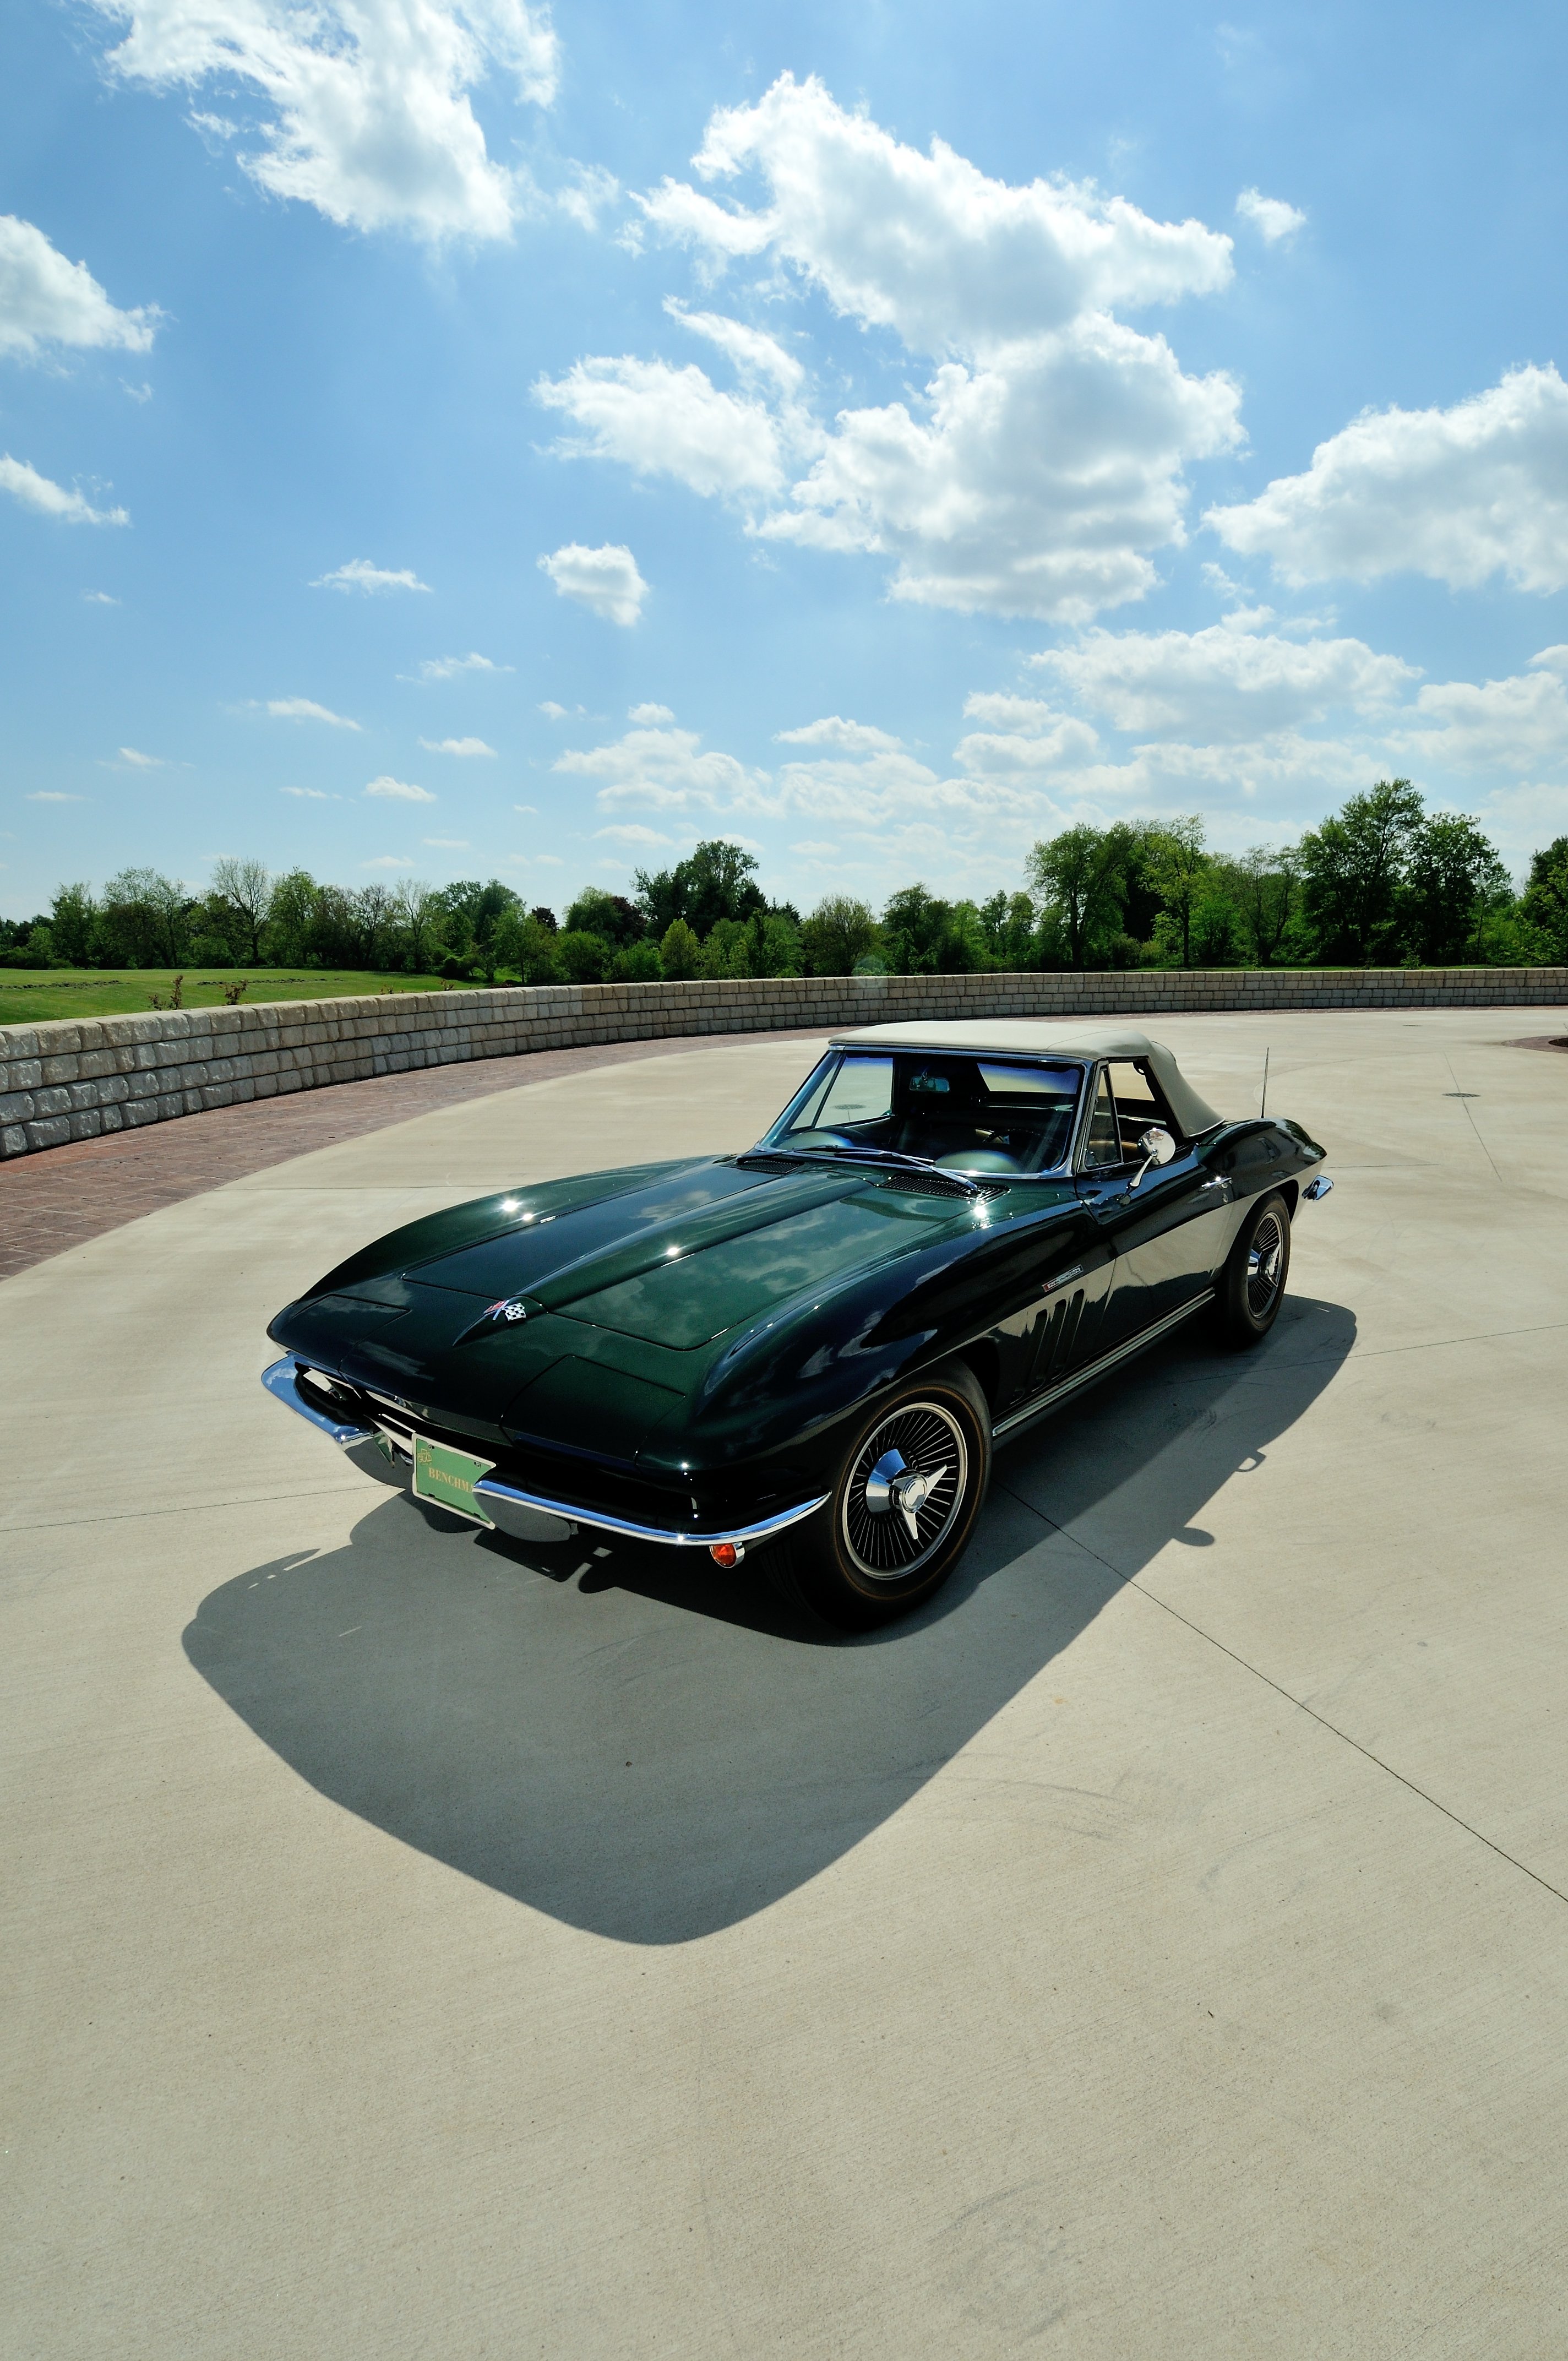 1965, Chevrolet, Corvette, Stingray, Ating, Ray, Muscle, Convertible, Classic, Old, Original, Usa,  41 Wallpaper